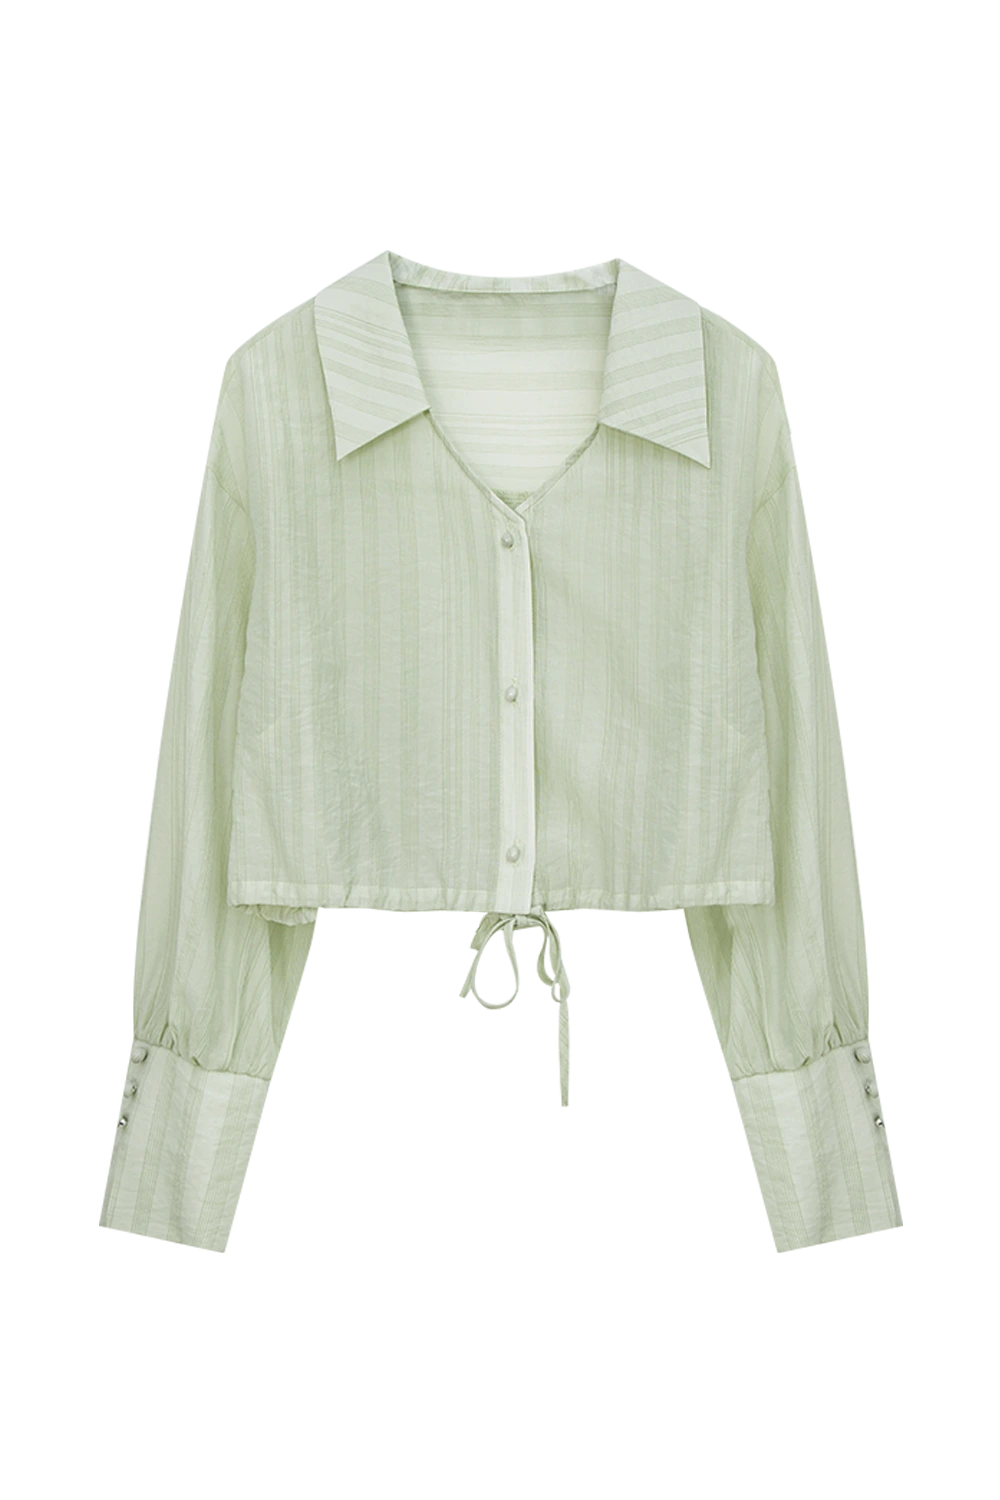 Trendy Cropped Blouse with Button-Up Front and Tie Hem Detail